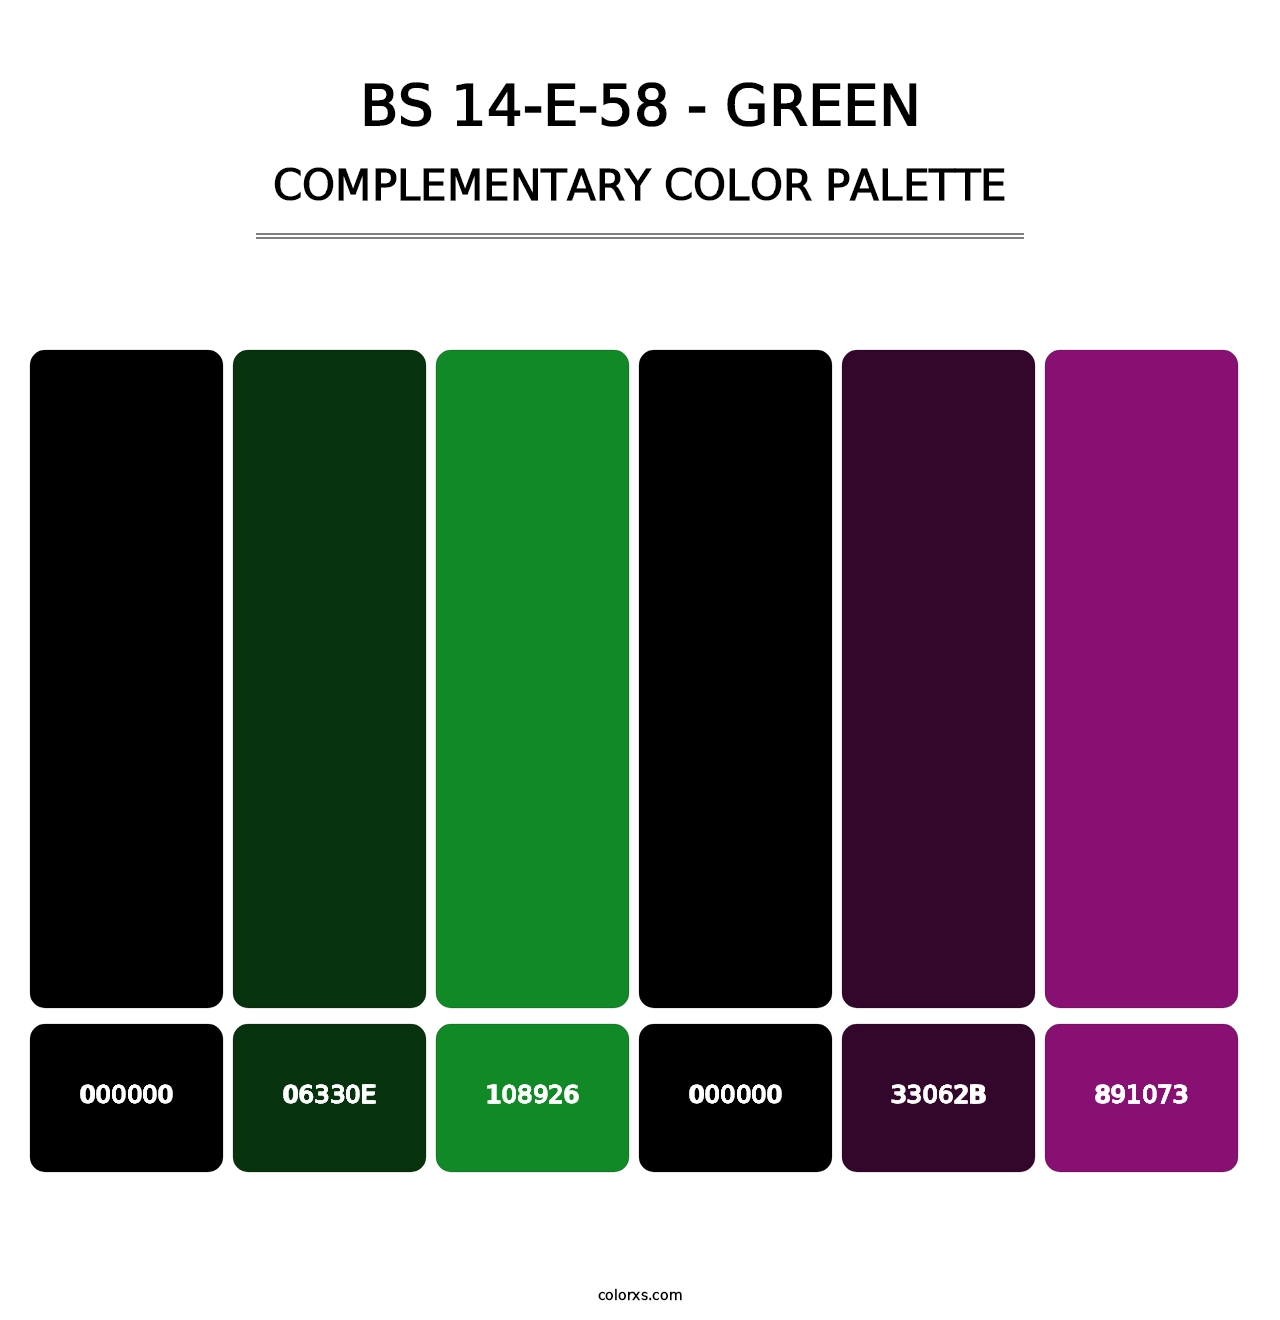 BS 14-E-58 - Green - Complementary Color Palette